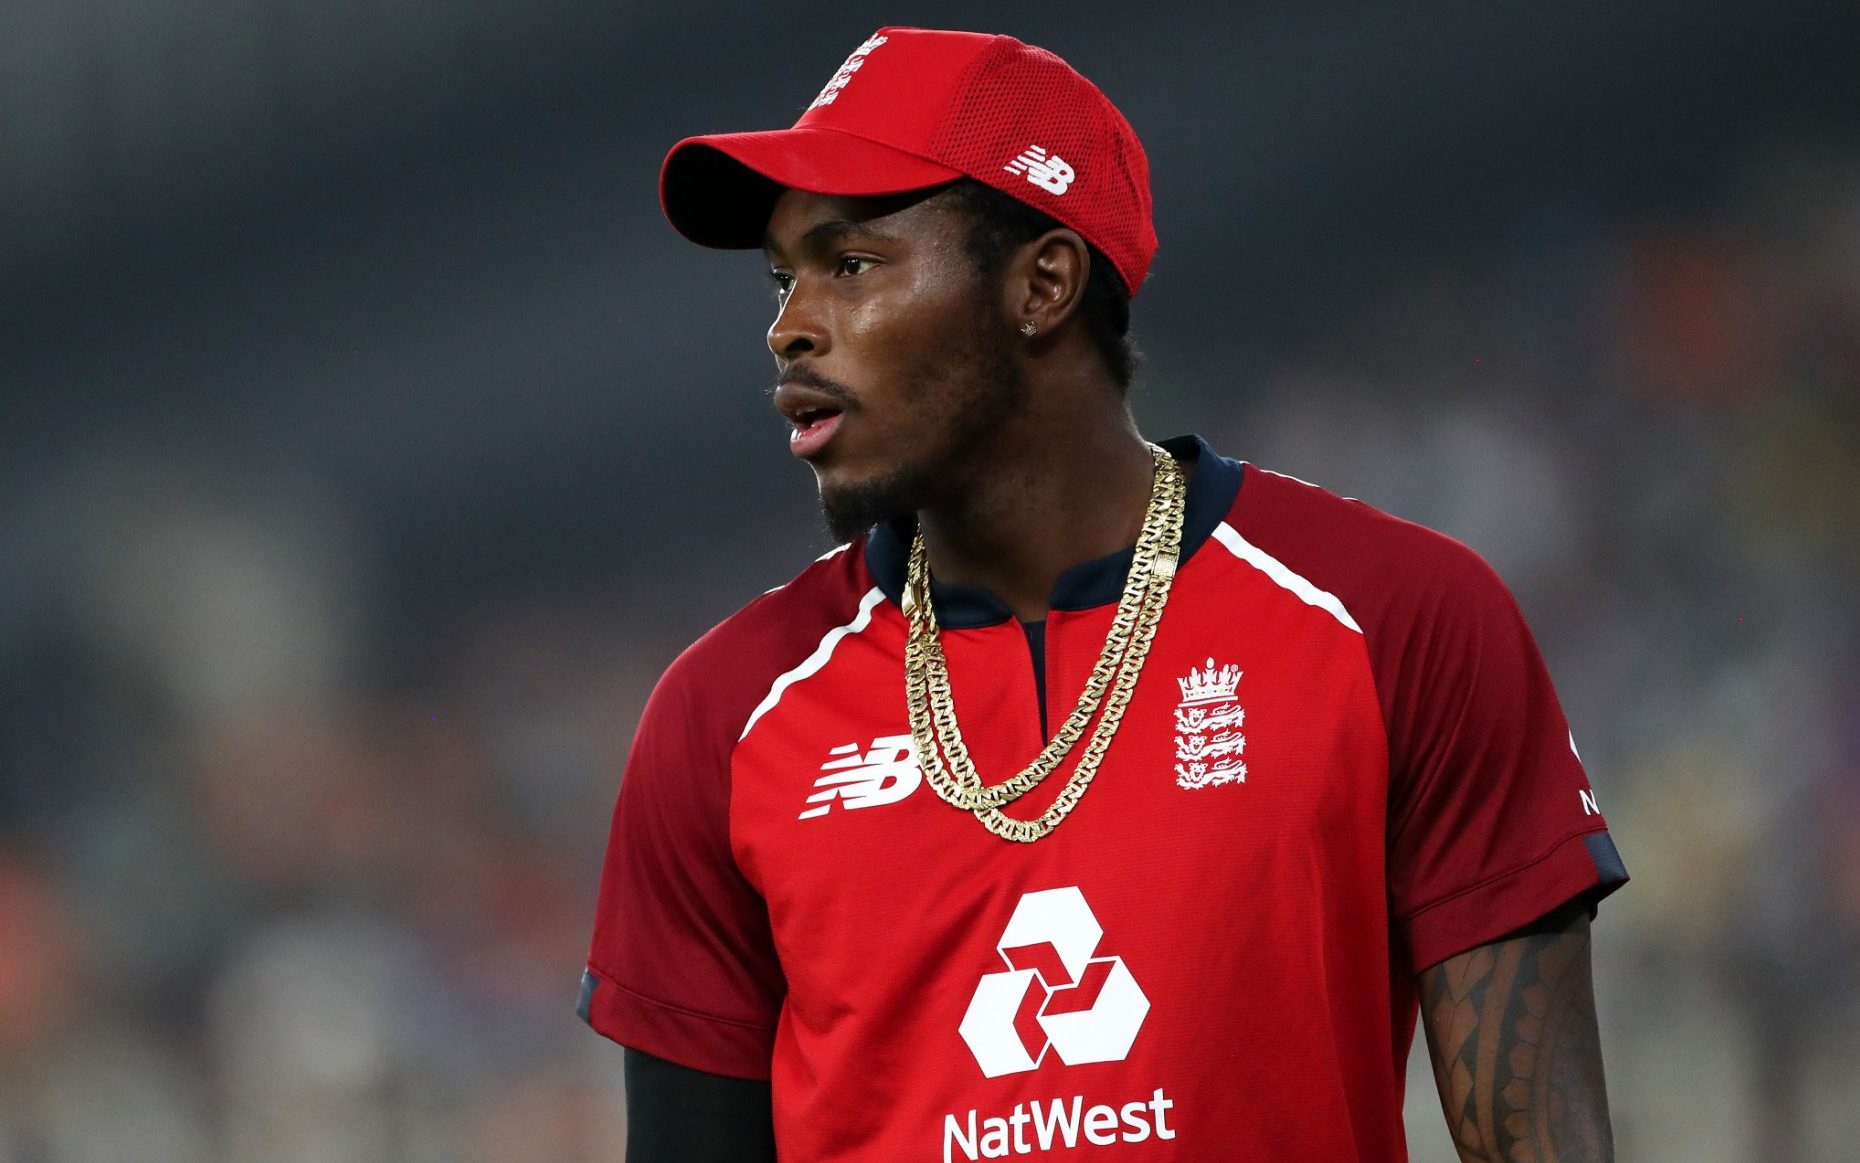 jofra archer named in england t20 world cup squad but chris woakes misses out